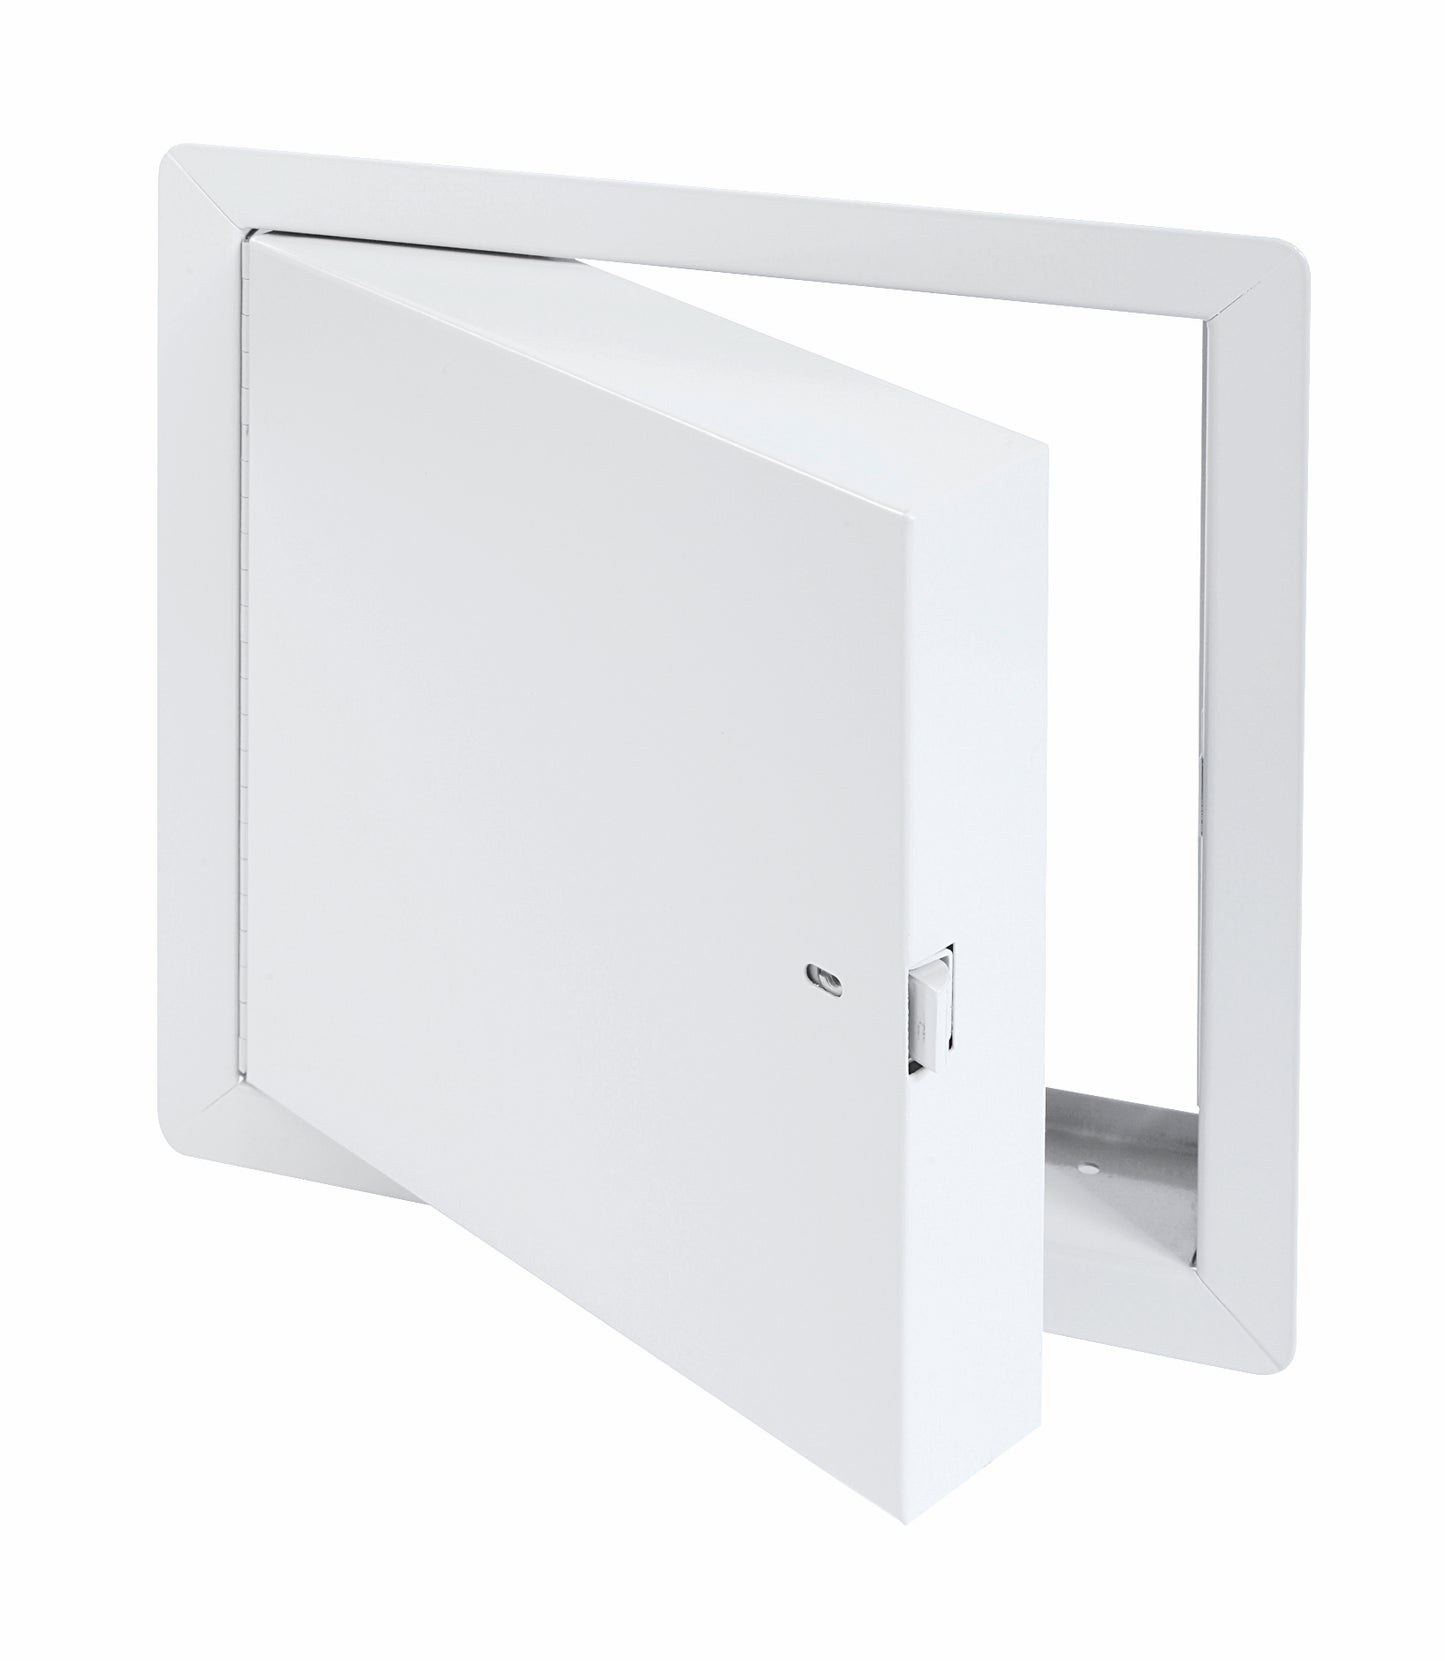 32"x32" Fire-rated Insulated Access Door with Exposed Flange, Cendrex